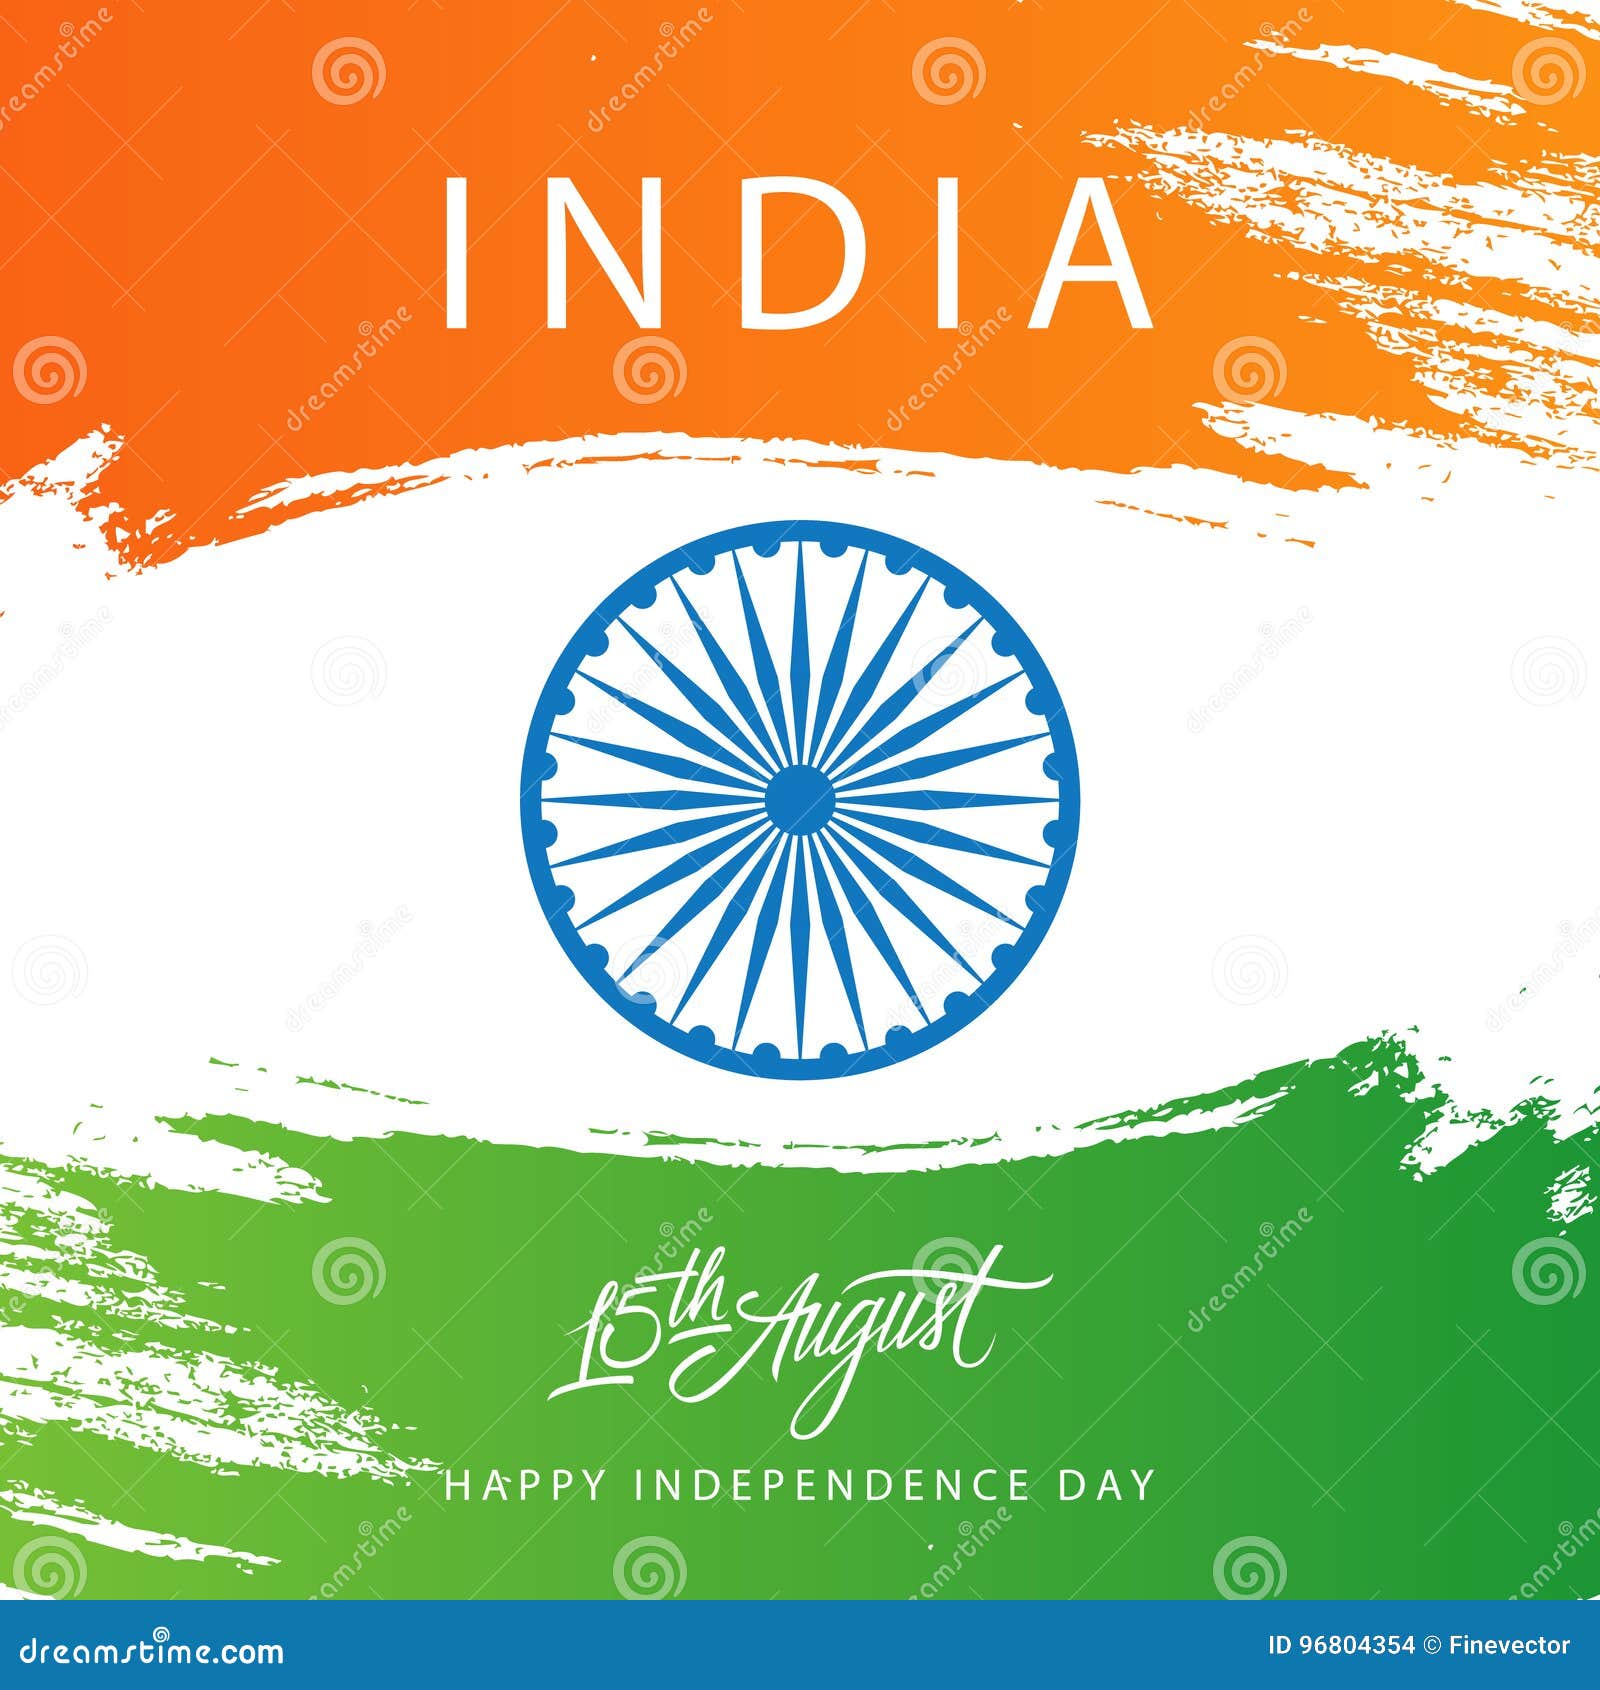 India Happy Independence Day, 15 August Celebration Card with ...